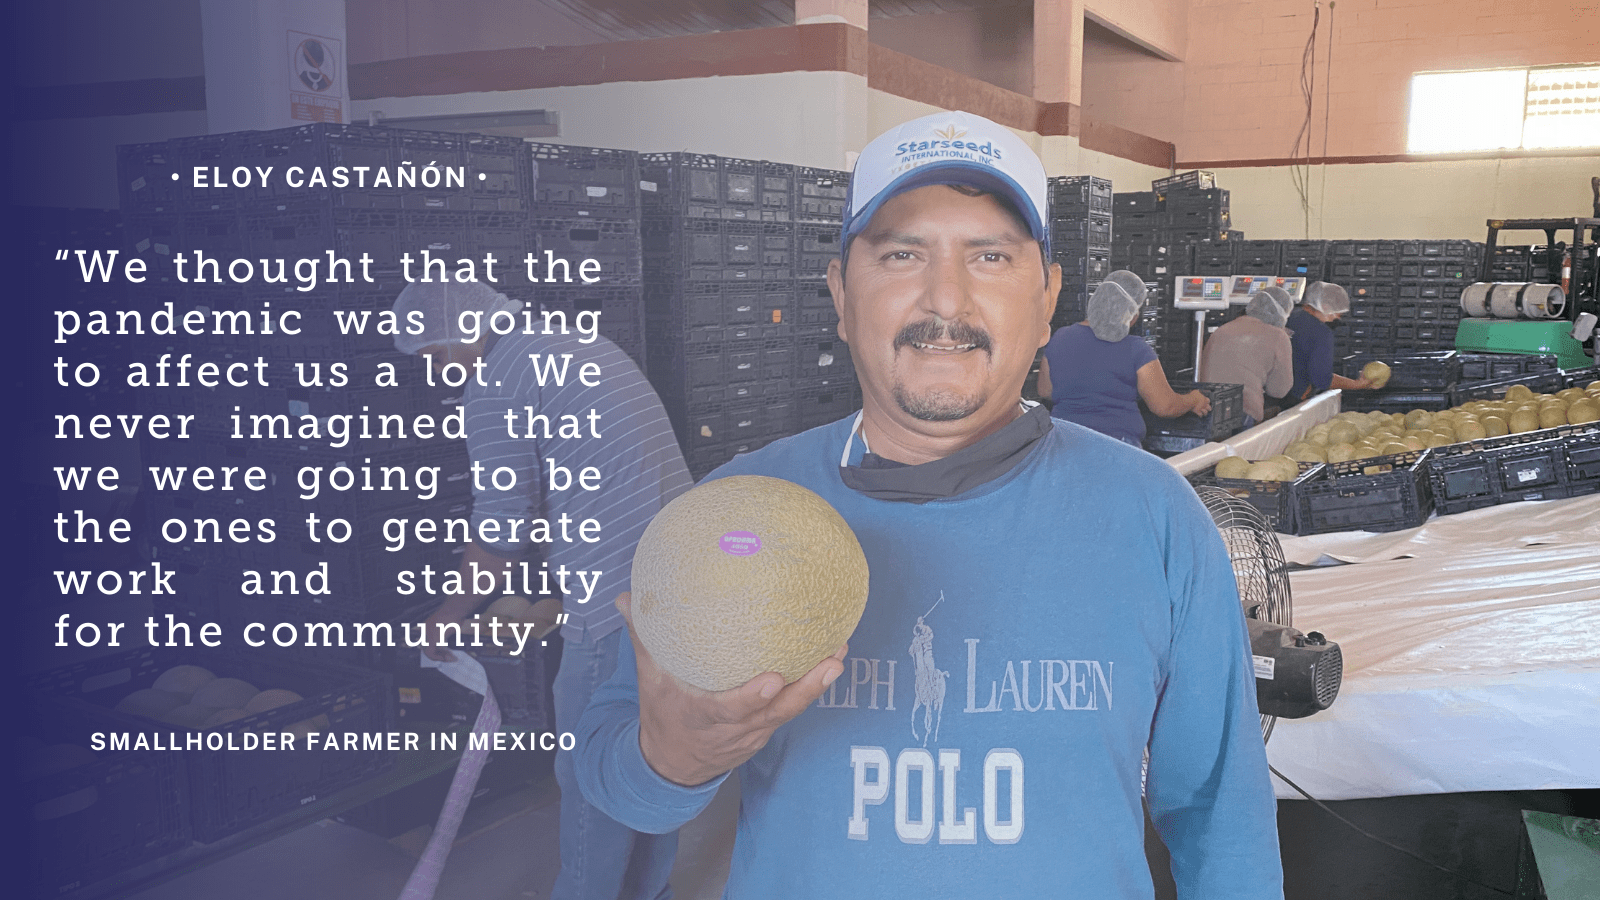 Purple quote graphic reads: "We thought that the pandemic was going to affect us a lot. We never imagined that we were going to be the ones to generate work and stability for the community.” -Eloy Castañón, smallholder farmer, Mexico